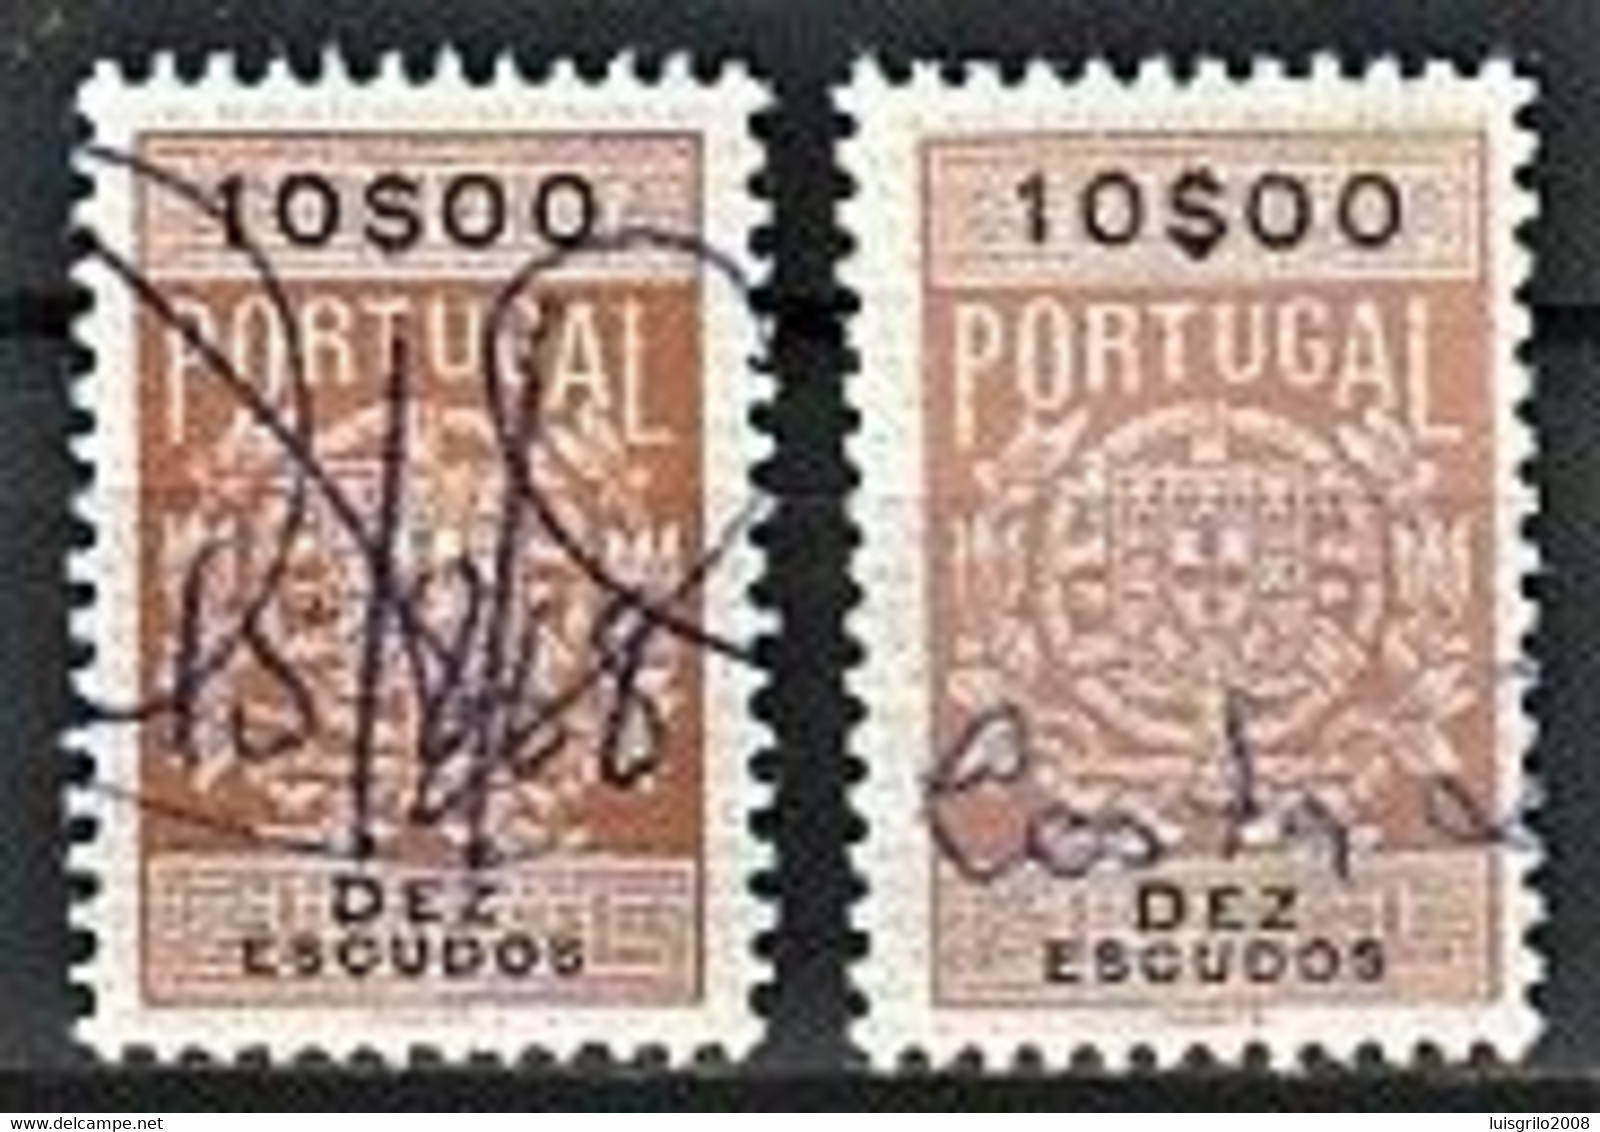 Fiscal/ Revenue, Portugal 1940 - Estampilha Fiscal -|- 10$00 - COLOR VARIANT - Is The Stamp Of The Right - Oblitérés